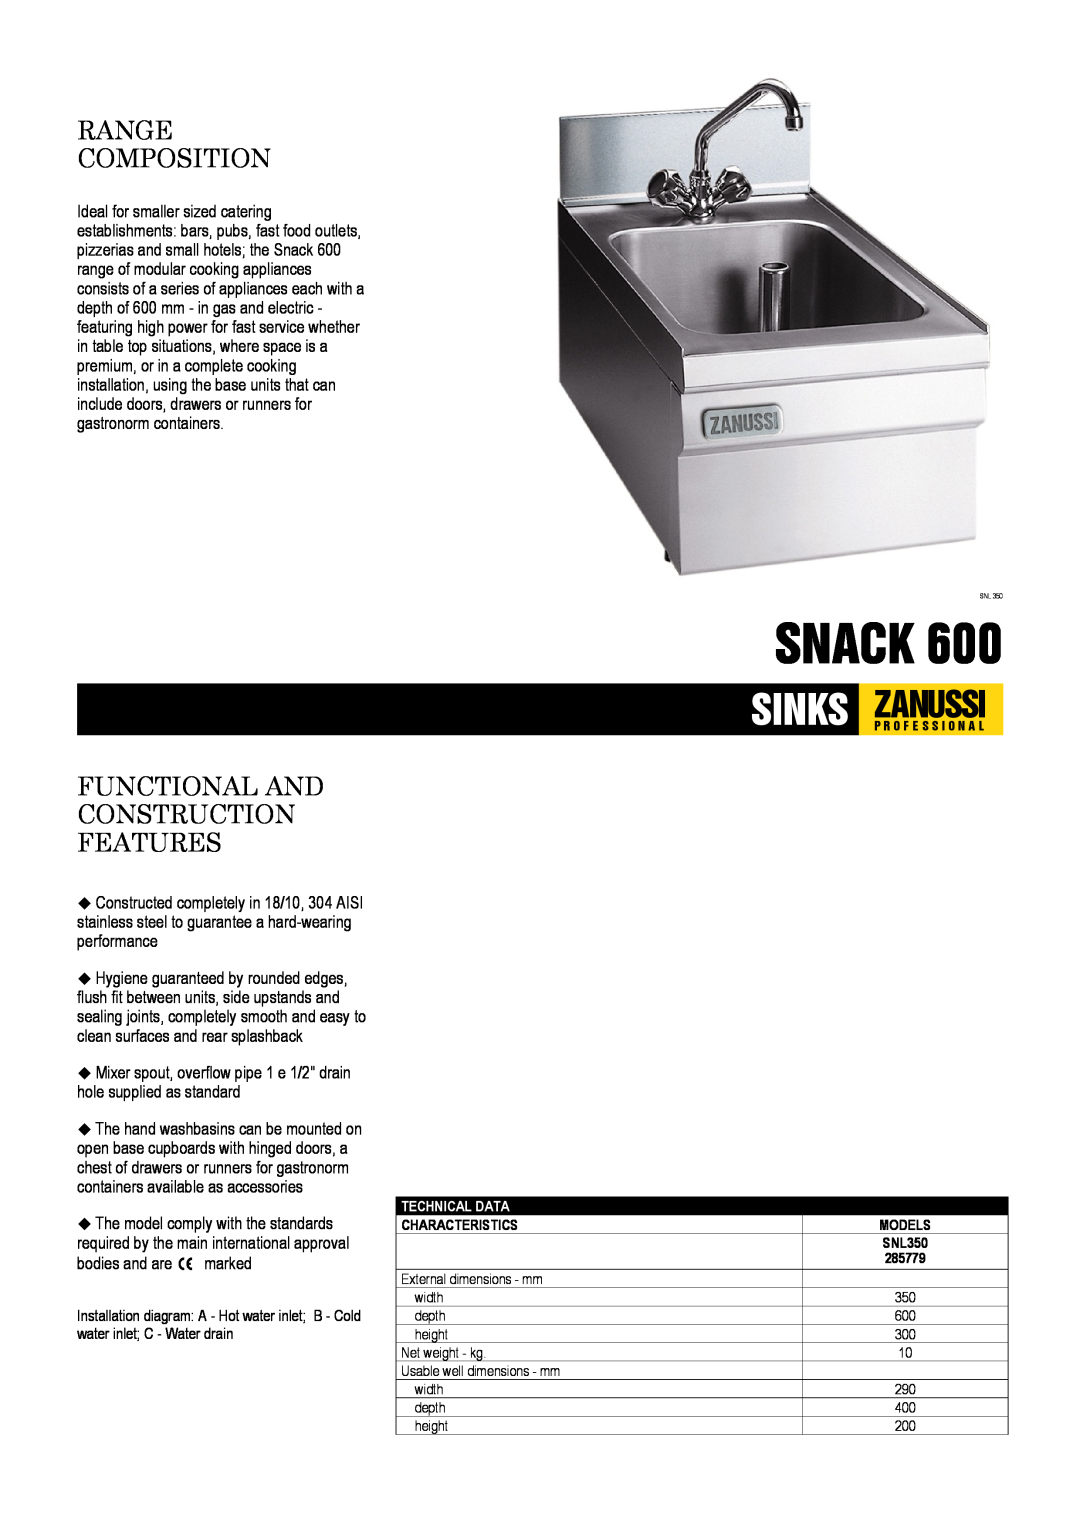 Electrolux SNL350, Snack 600, 285779 dimensions Range Composition, Functional And Construction Features 